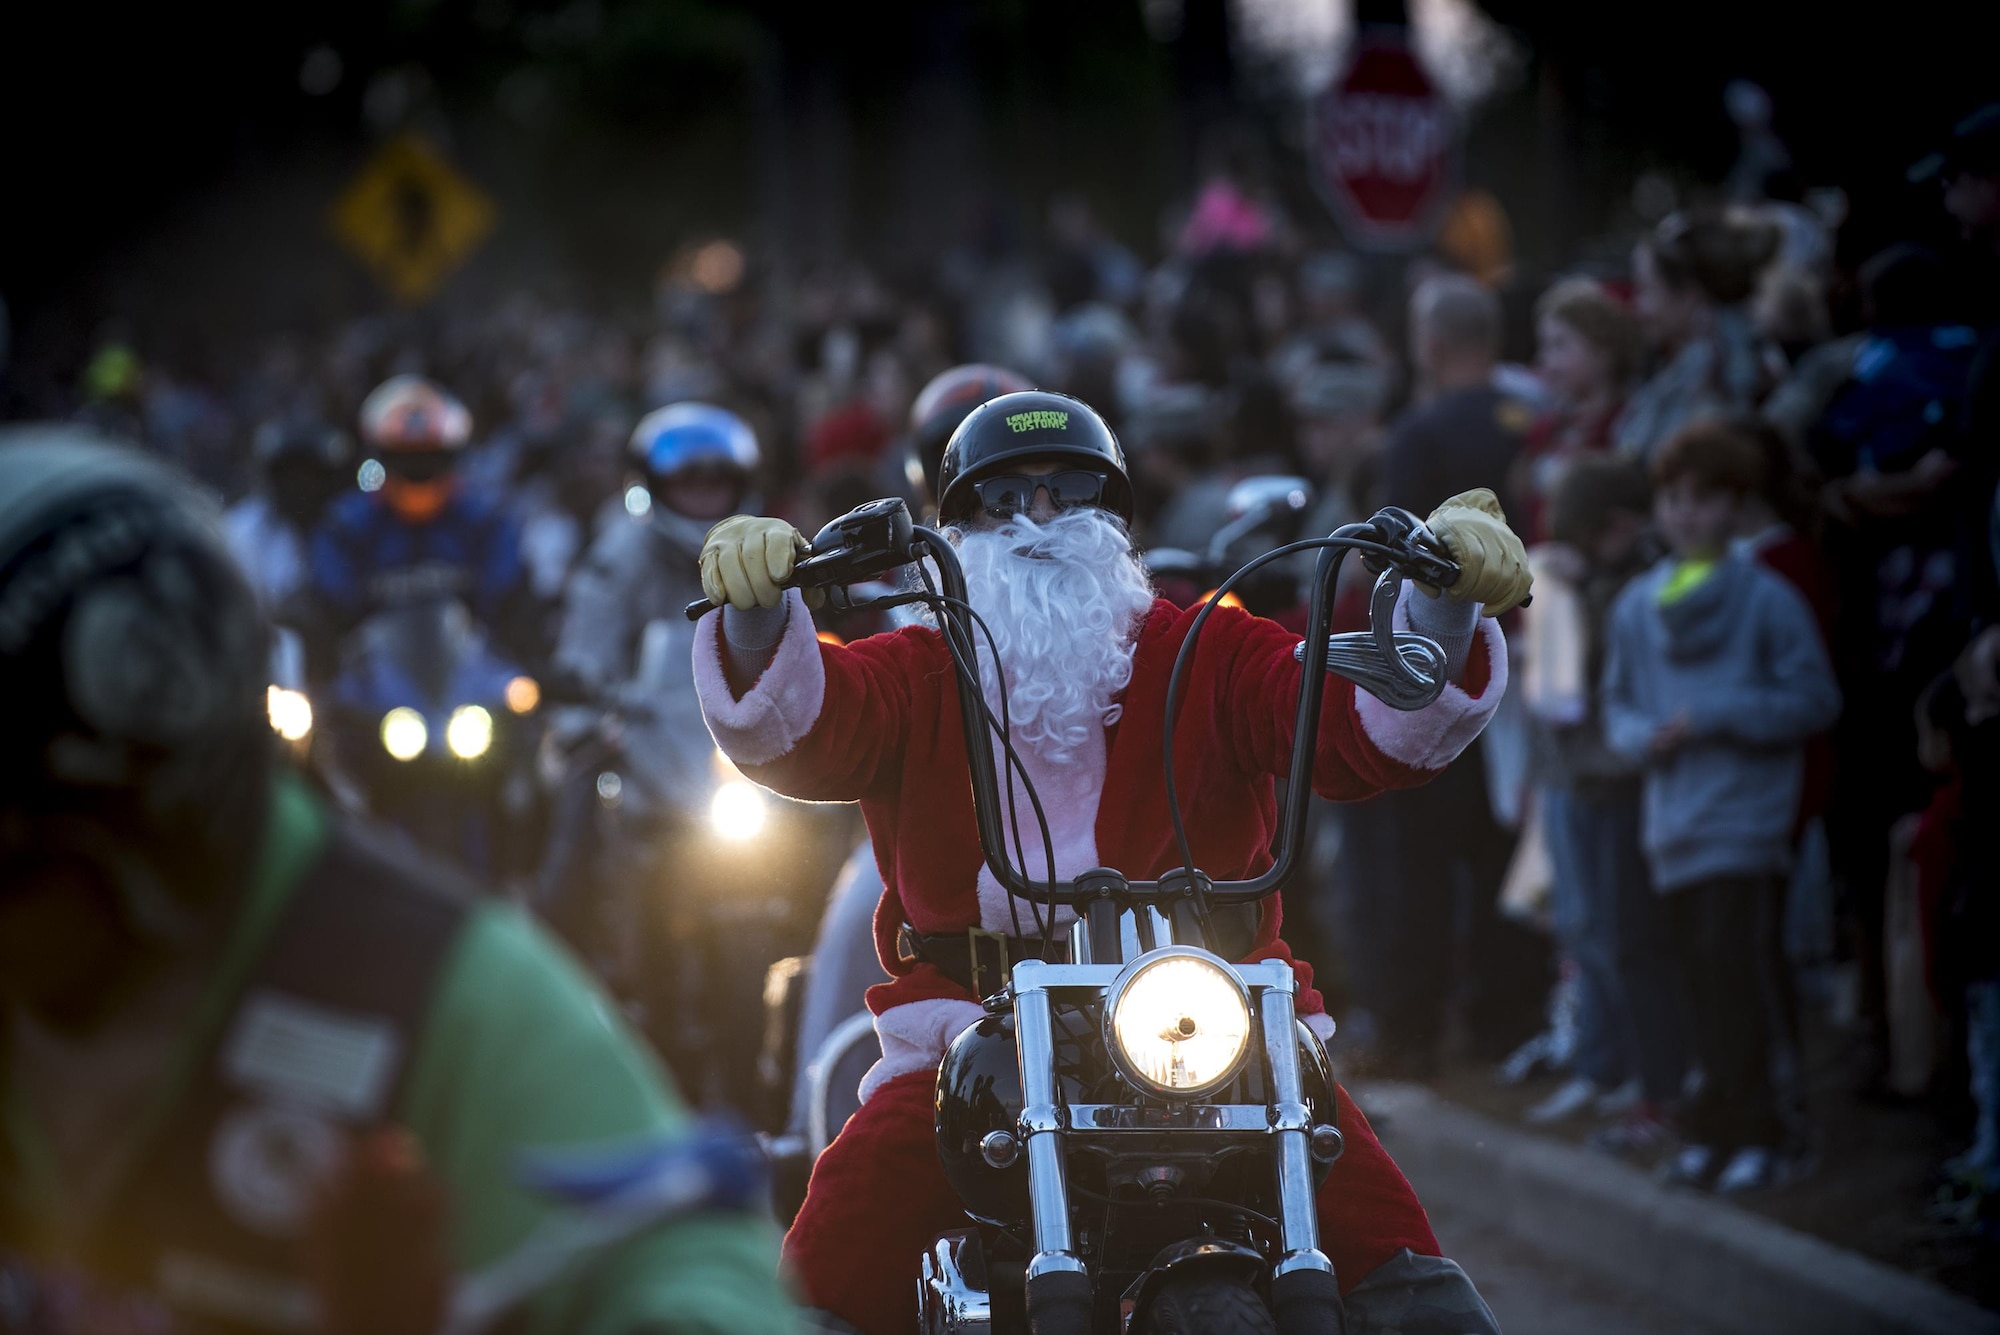 Airman 1st Class Andrew Soares, 23d Medical Support Squadron medical lab technician, rides his motorcycle in a holiday parade, Dec. 2, 2016, at Moody Air Force Base, Ga. The ceremony included vendors, crafts, entertainment, door prizes, snow pits and visiting time with Santa and Mrs. Claus. (U.S. Air Force photo by Airman 1st Class Daniel Snider)